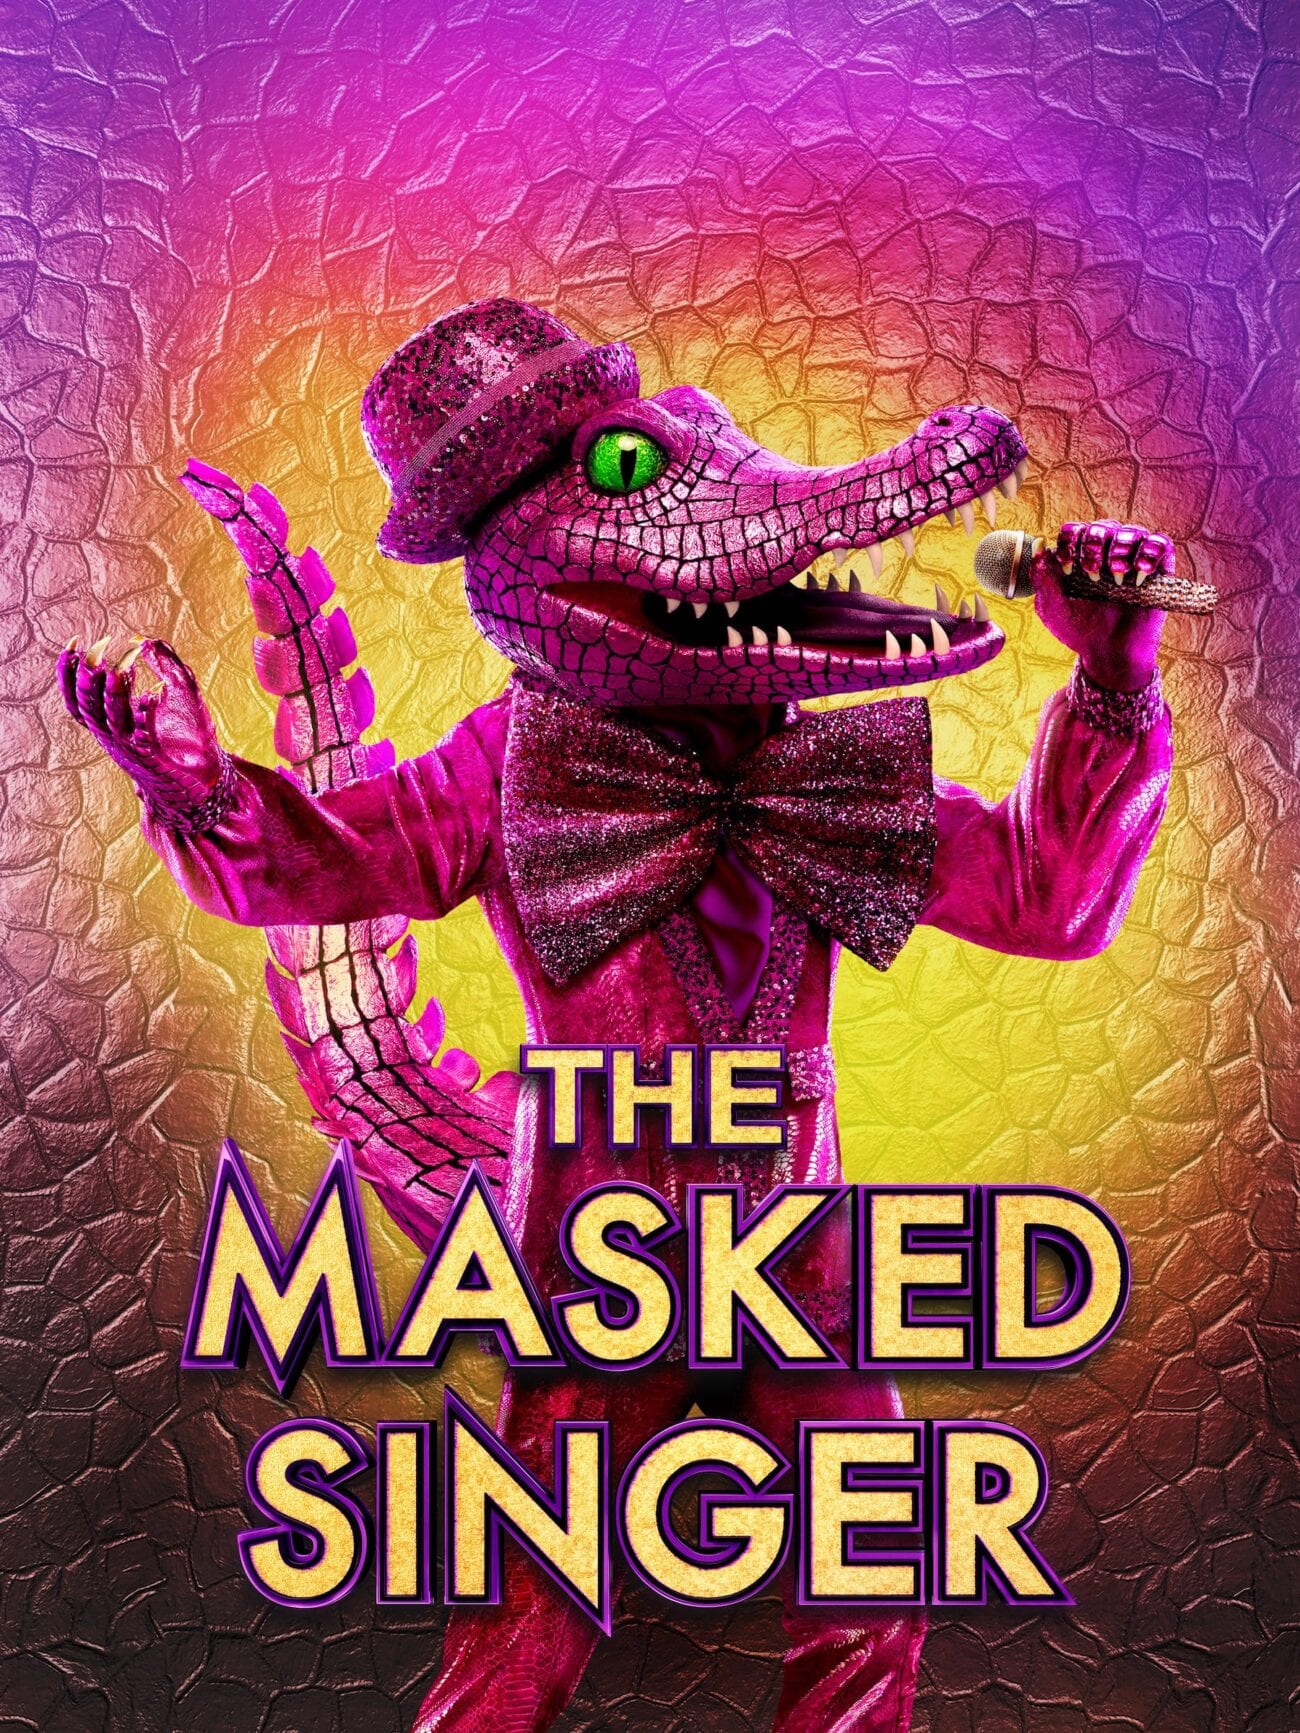 'The Masked Singer' premiered in 2019 and already has five seasons for talent show lovers to bingewatch. Here are the best and worst episodes.